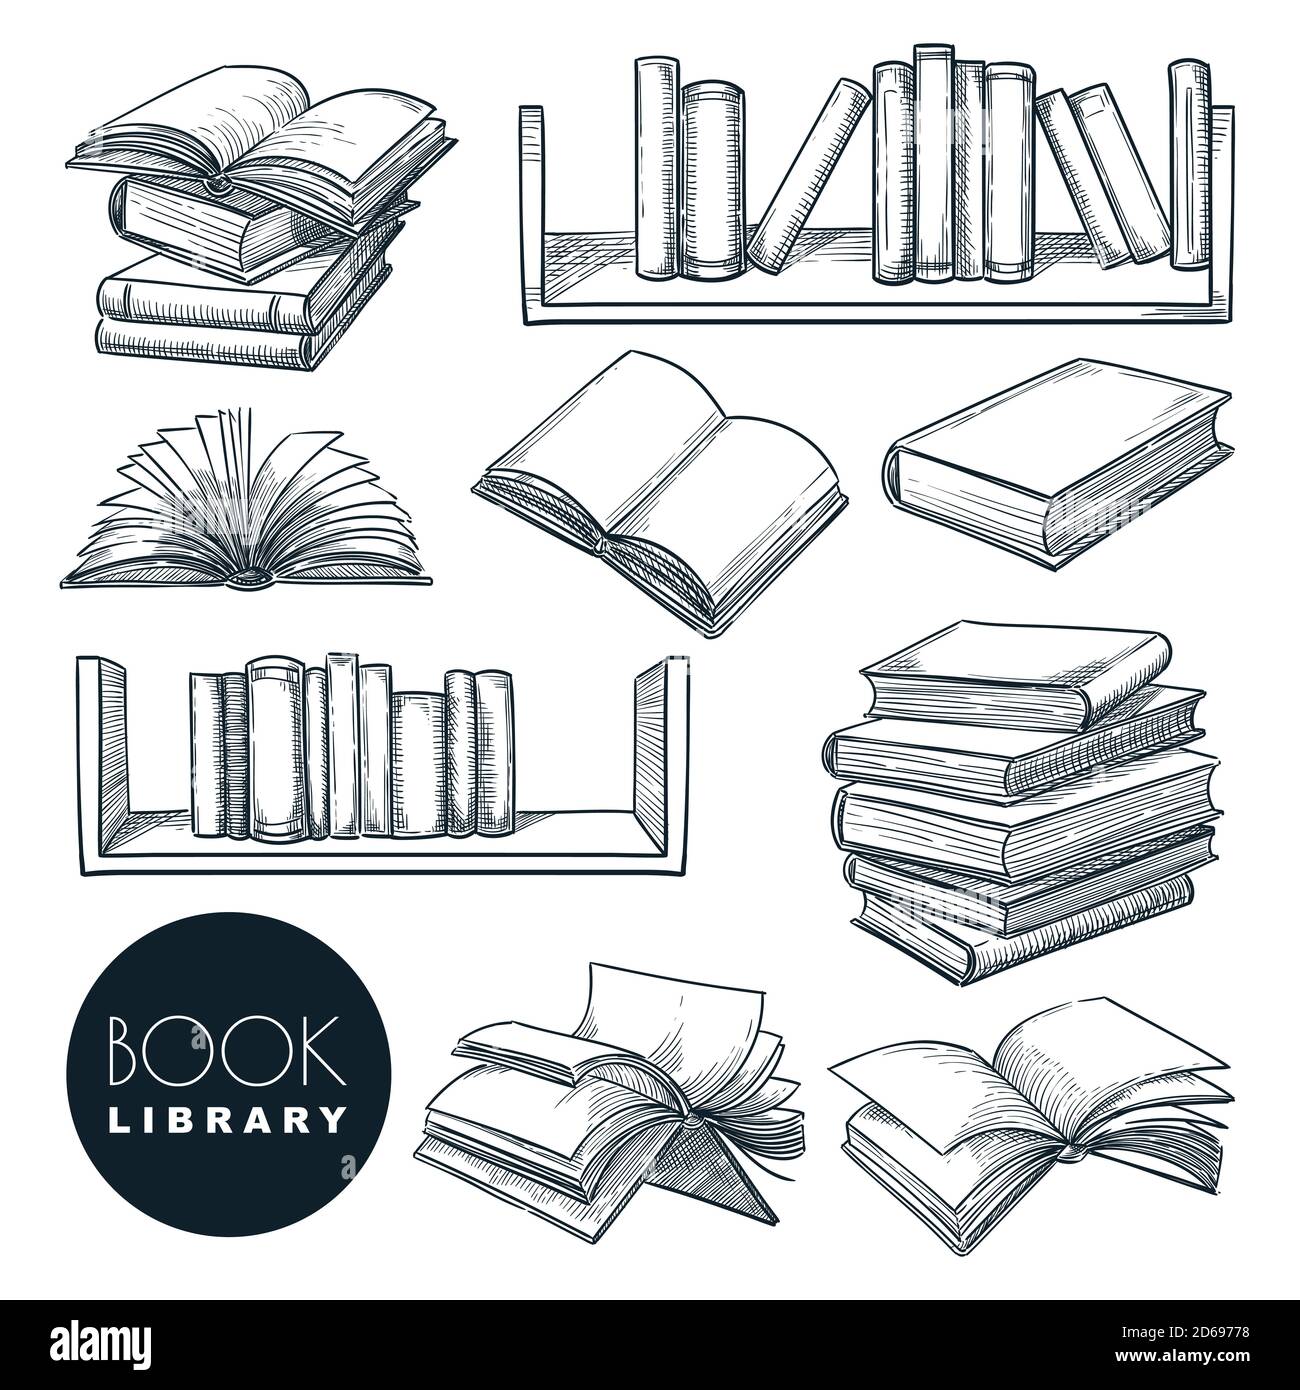 Sketch - blank open book and stack books Vector Image